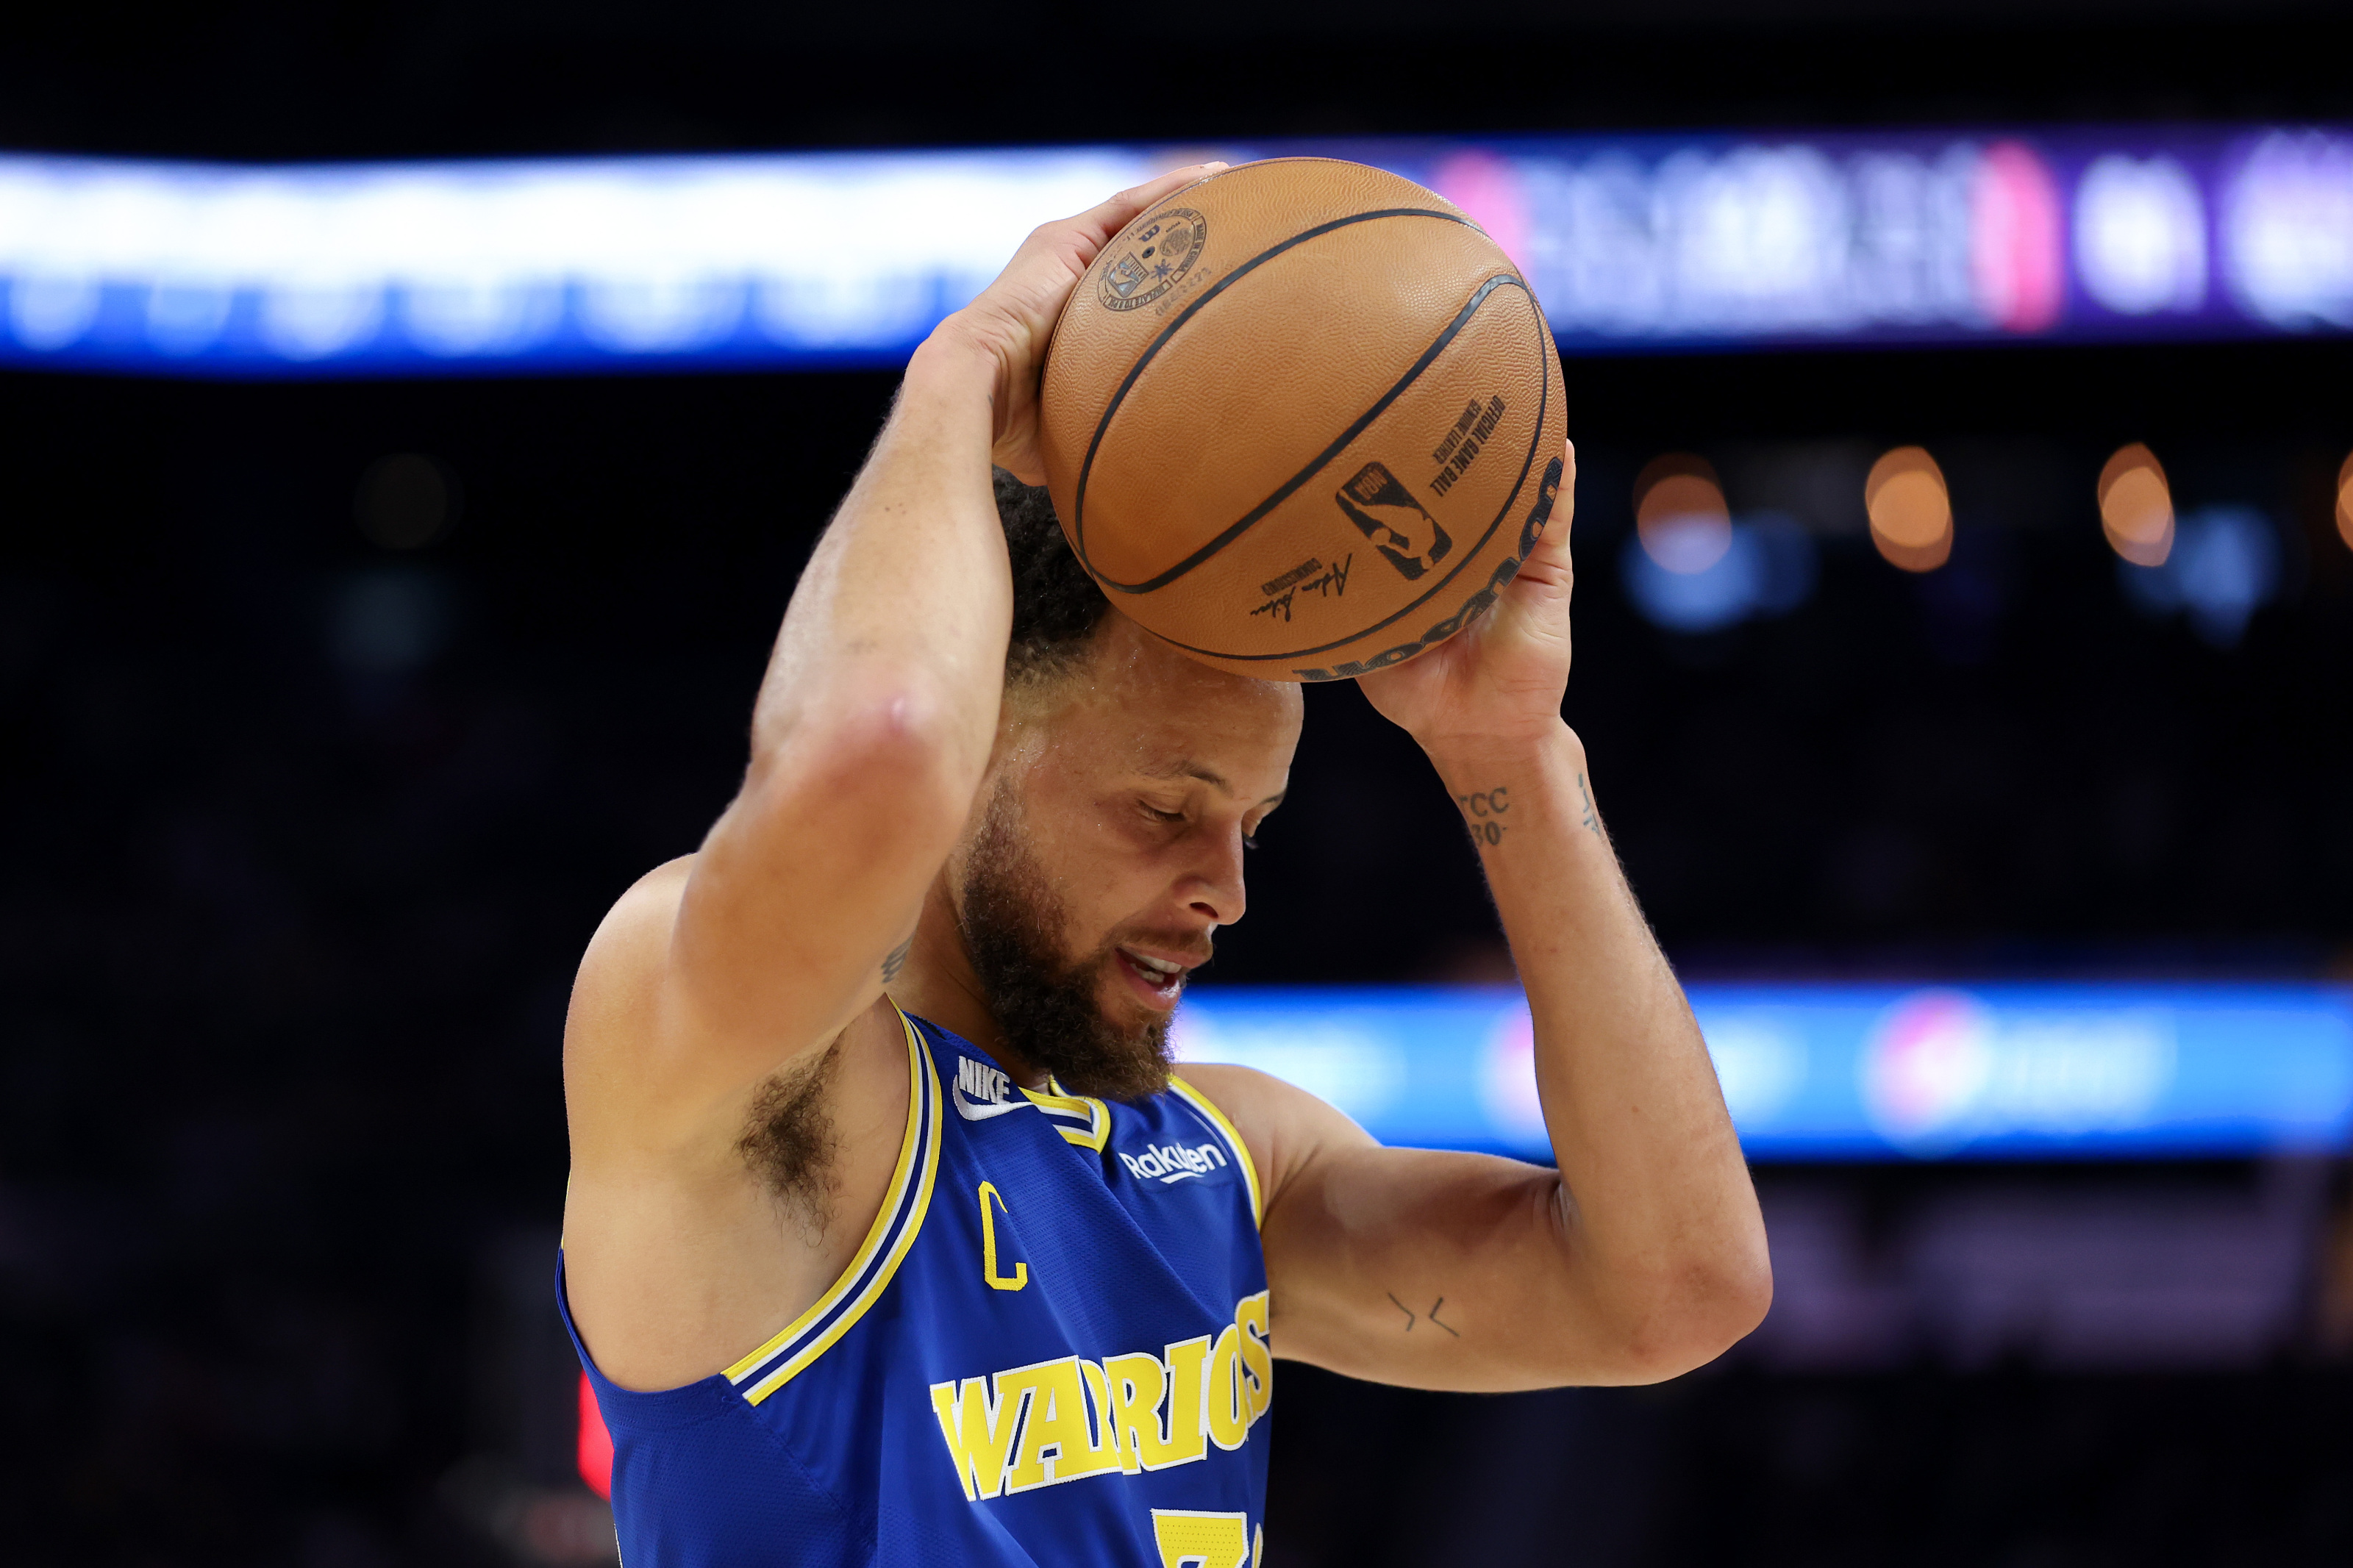 Steph Curry explodes for 50 points but Golden State Warriors still